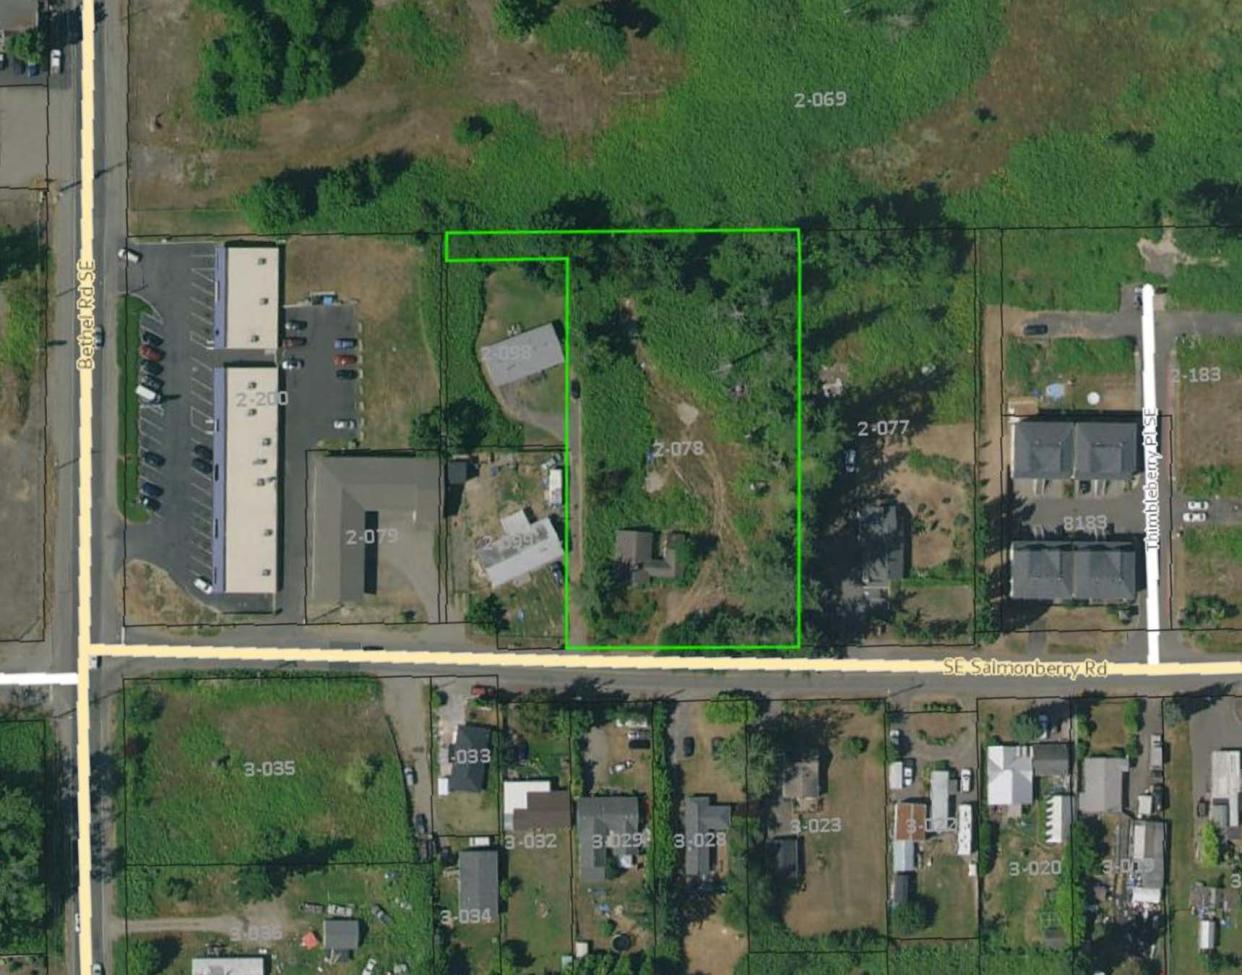 A Tacoma-based company plans to build two apartment buildings on SE Salmonberry Road in Port Orchard. The two buildings will offer 24 new residential units in total.